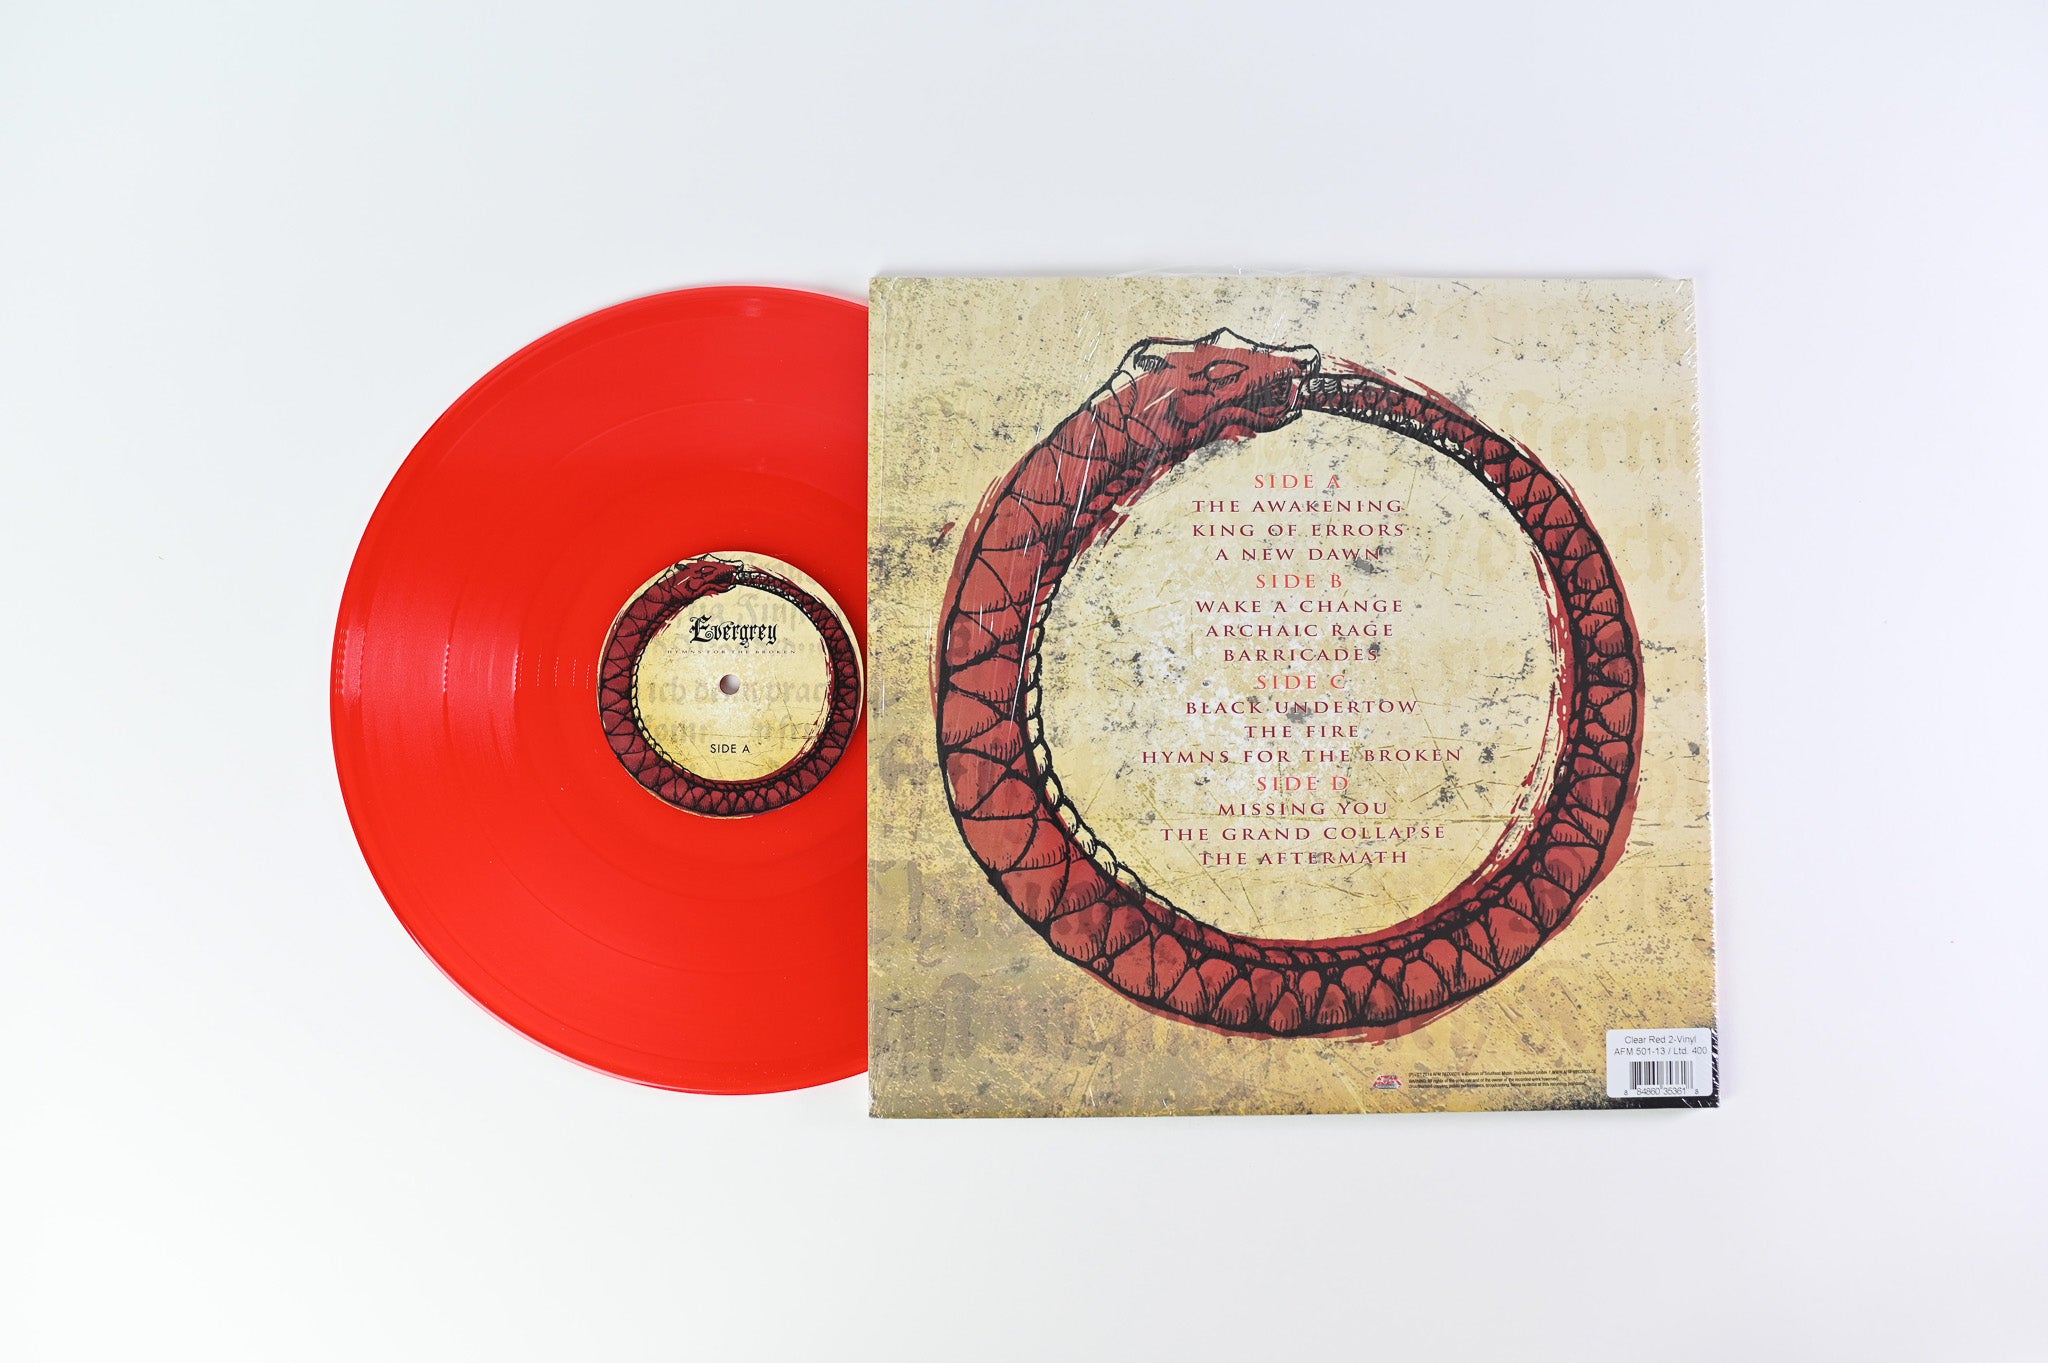 Evergrey - Hymns For The Broken on AFM Clear Red Vinyl